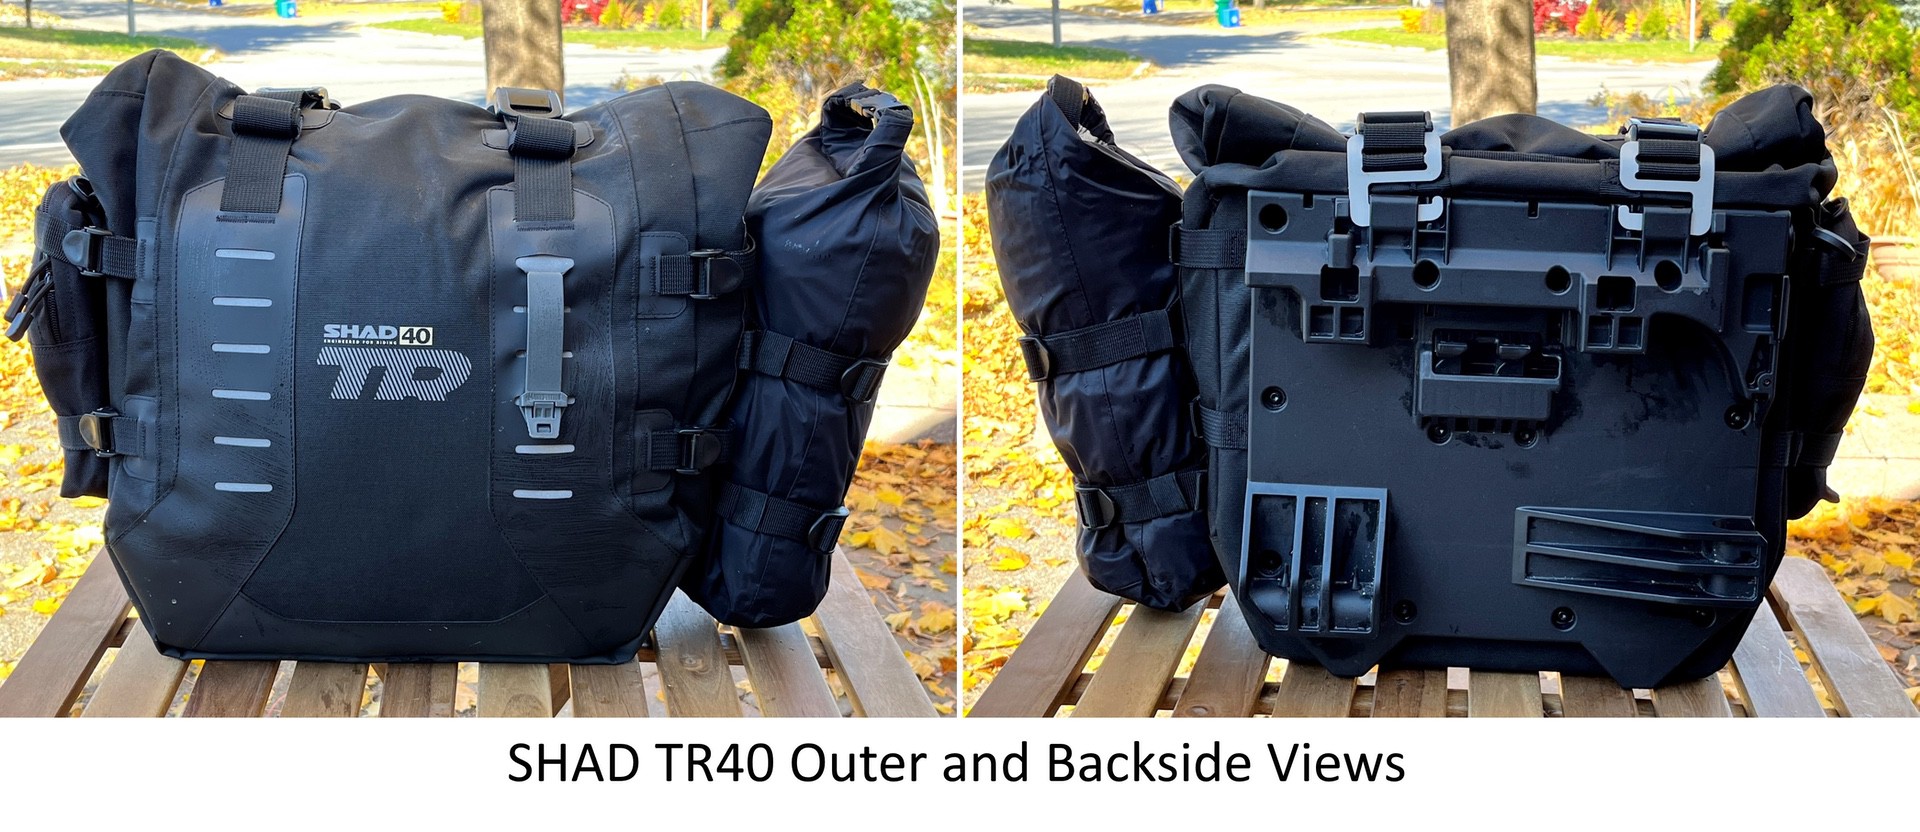 Front and rear of Shad Terra TR40 bag